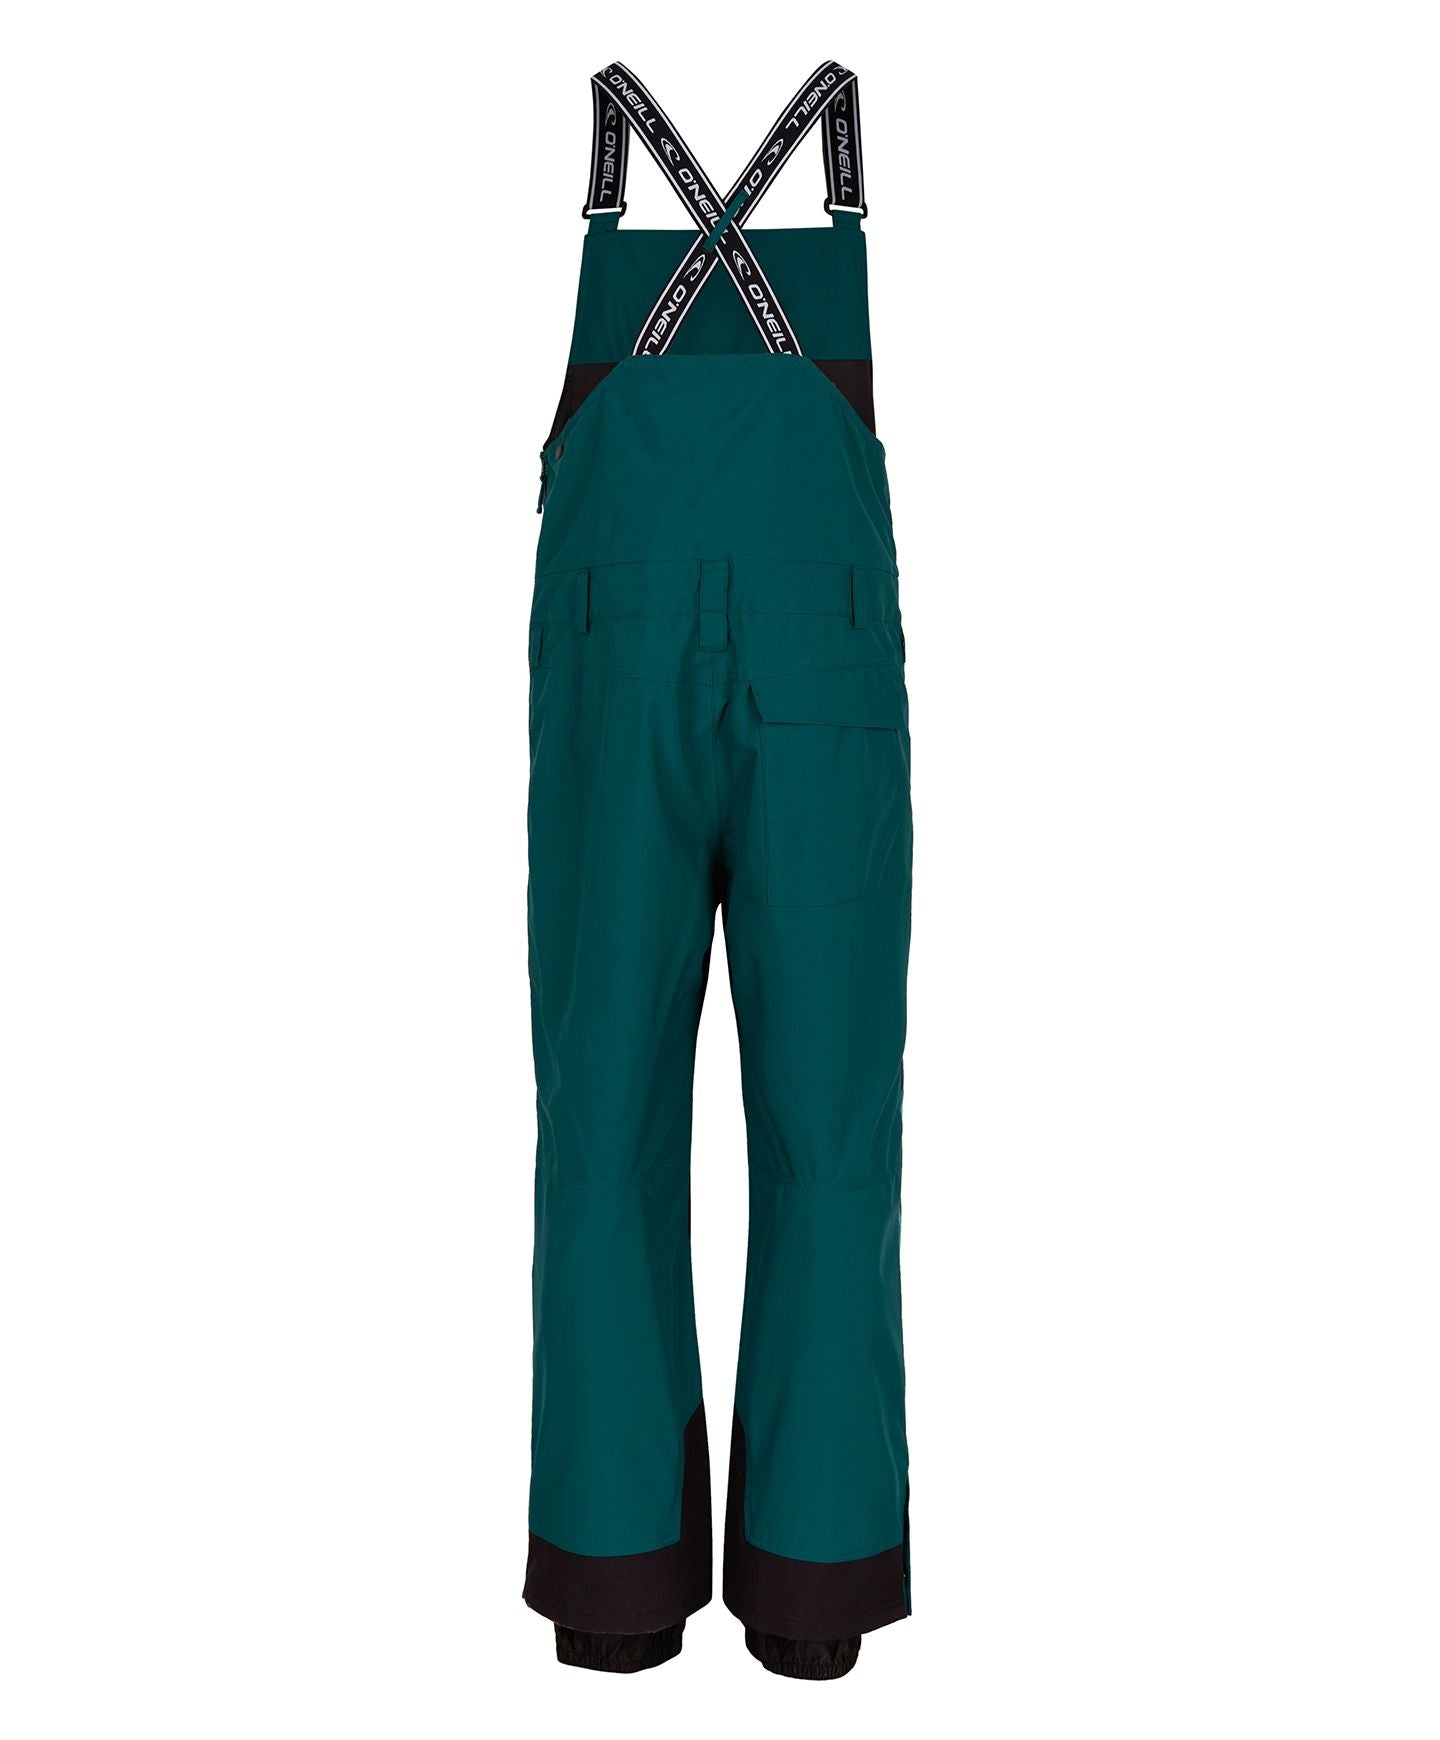 Buy Mens Shred Bib Snow Pants - Deep Teal Colour Block by ONeill online